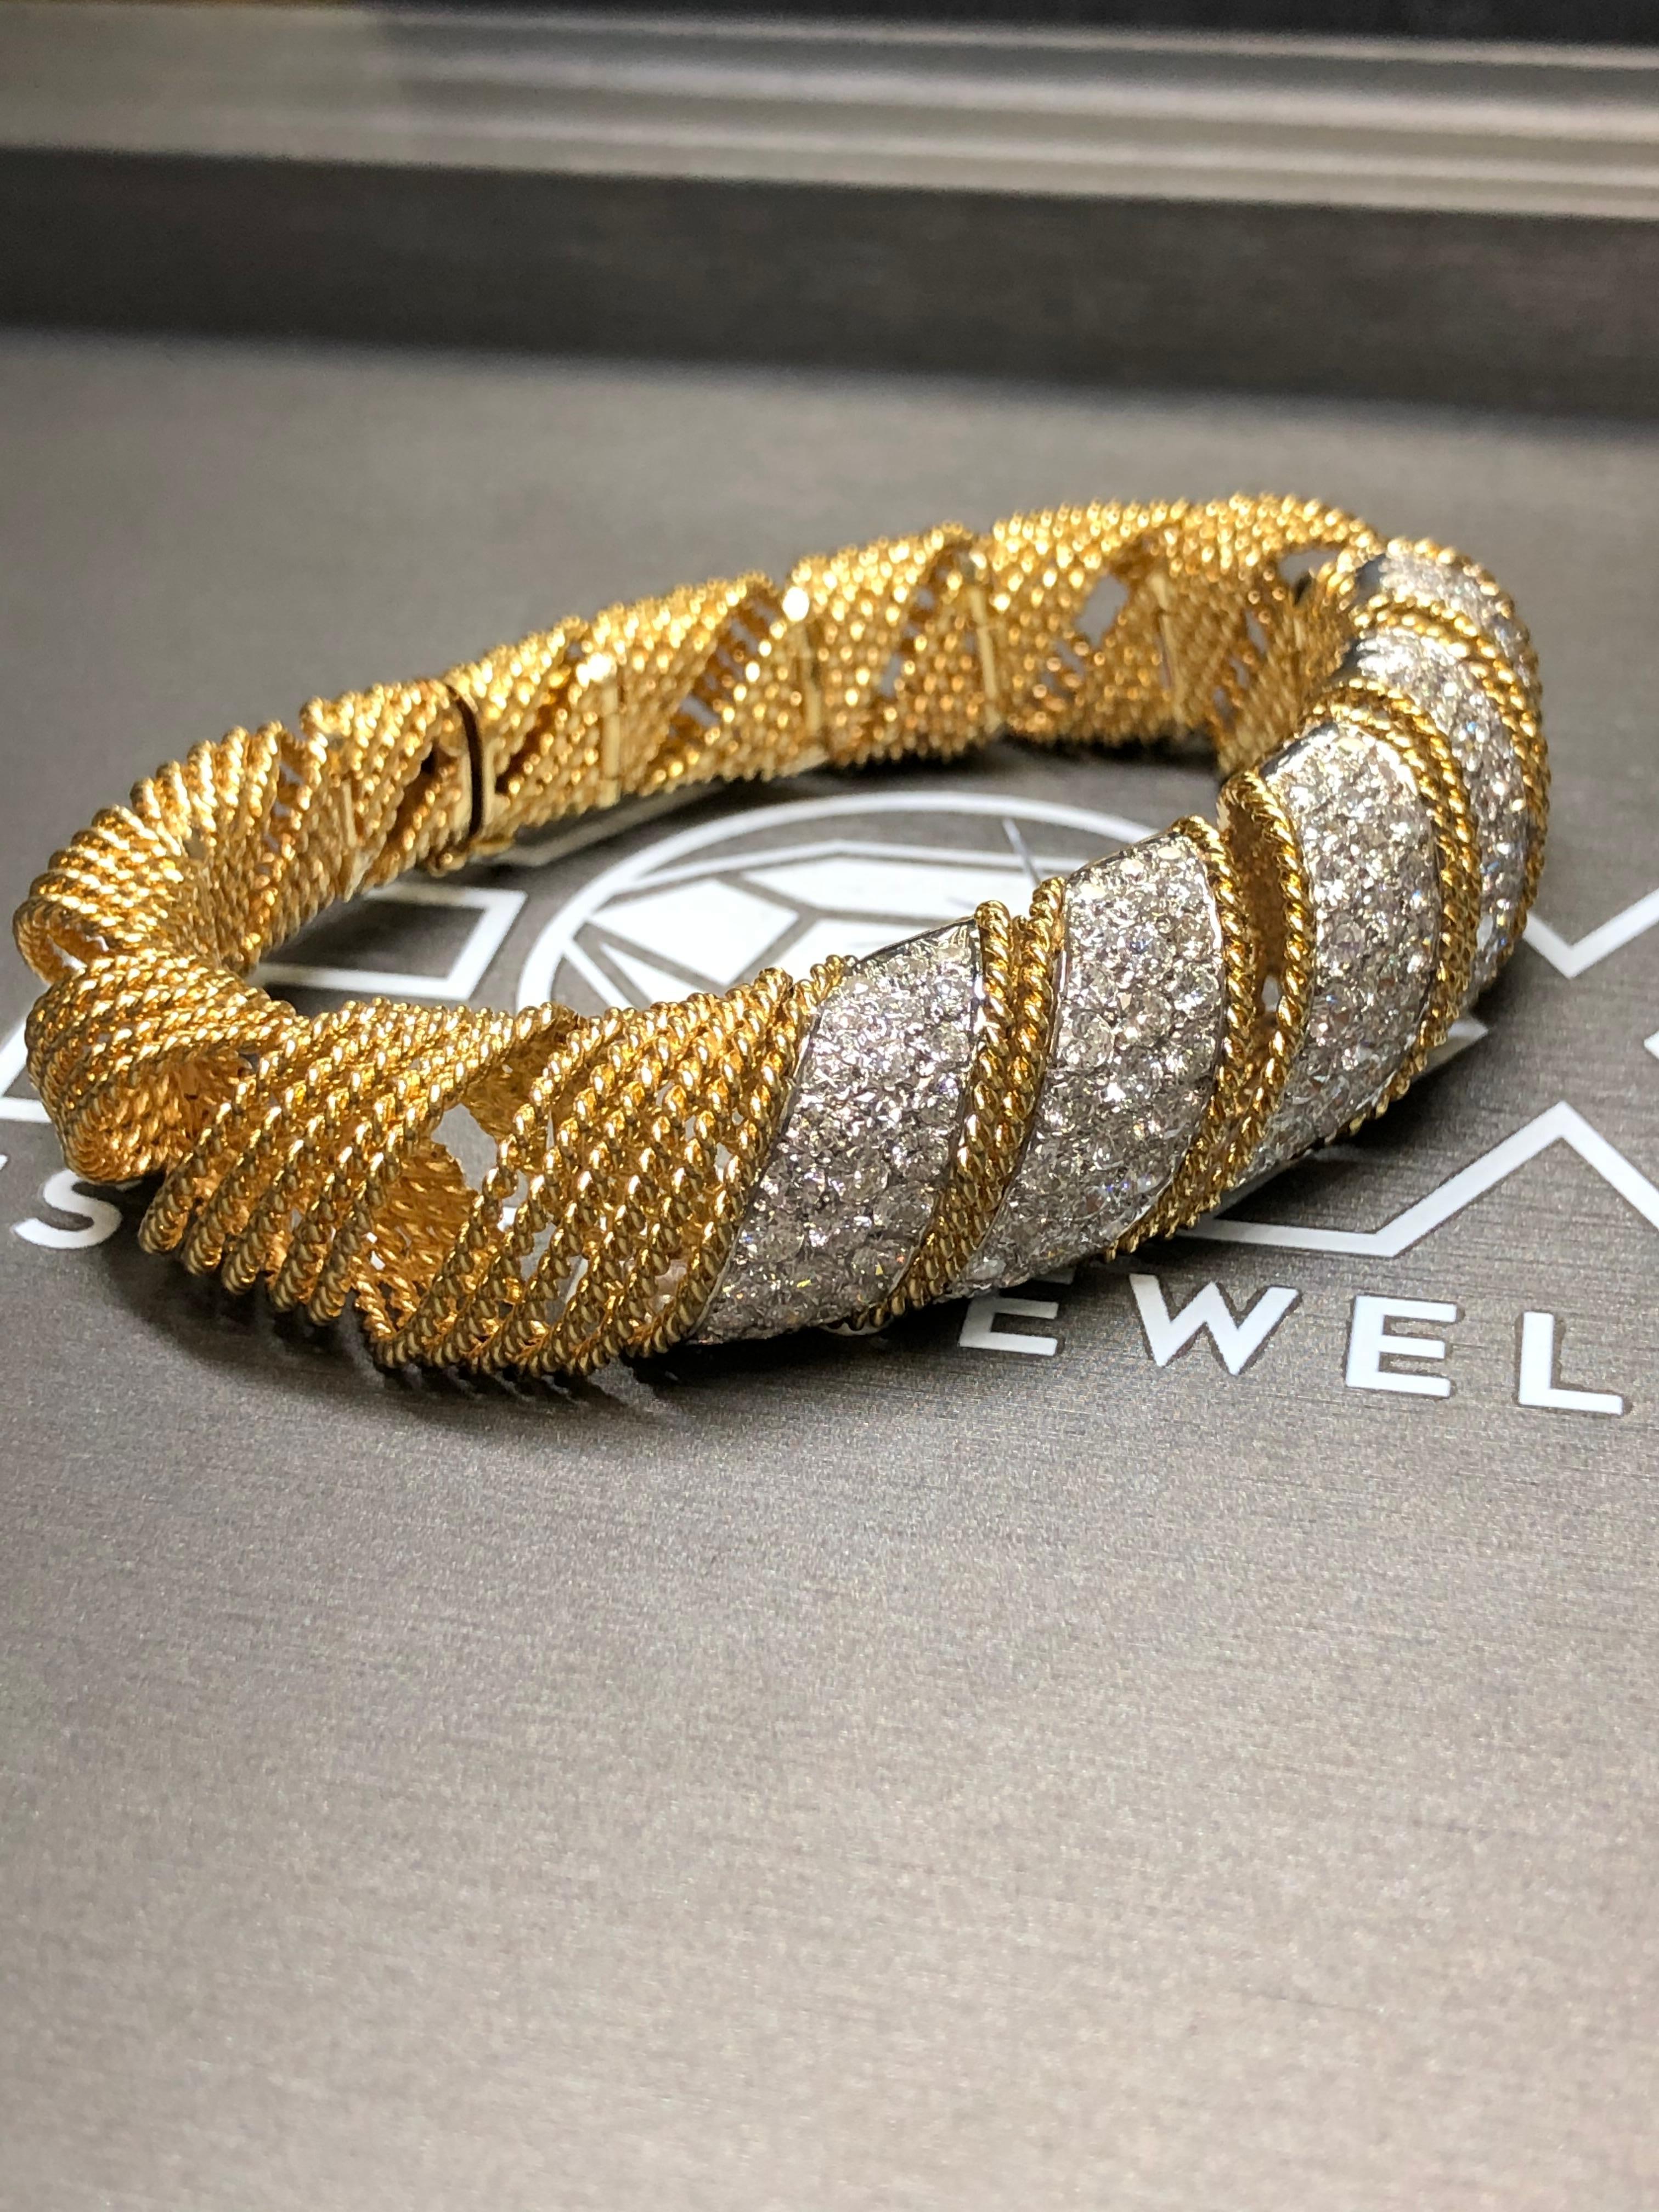 An incredible bracelet circa 1960’s done in 18K and set with approximately 9.20cttw blindingly white F-G color Vs clarity rounds diamonds. This bracelet also has a graduated design that tapers down towards the clasp which allows it to lay and wear